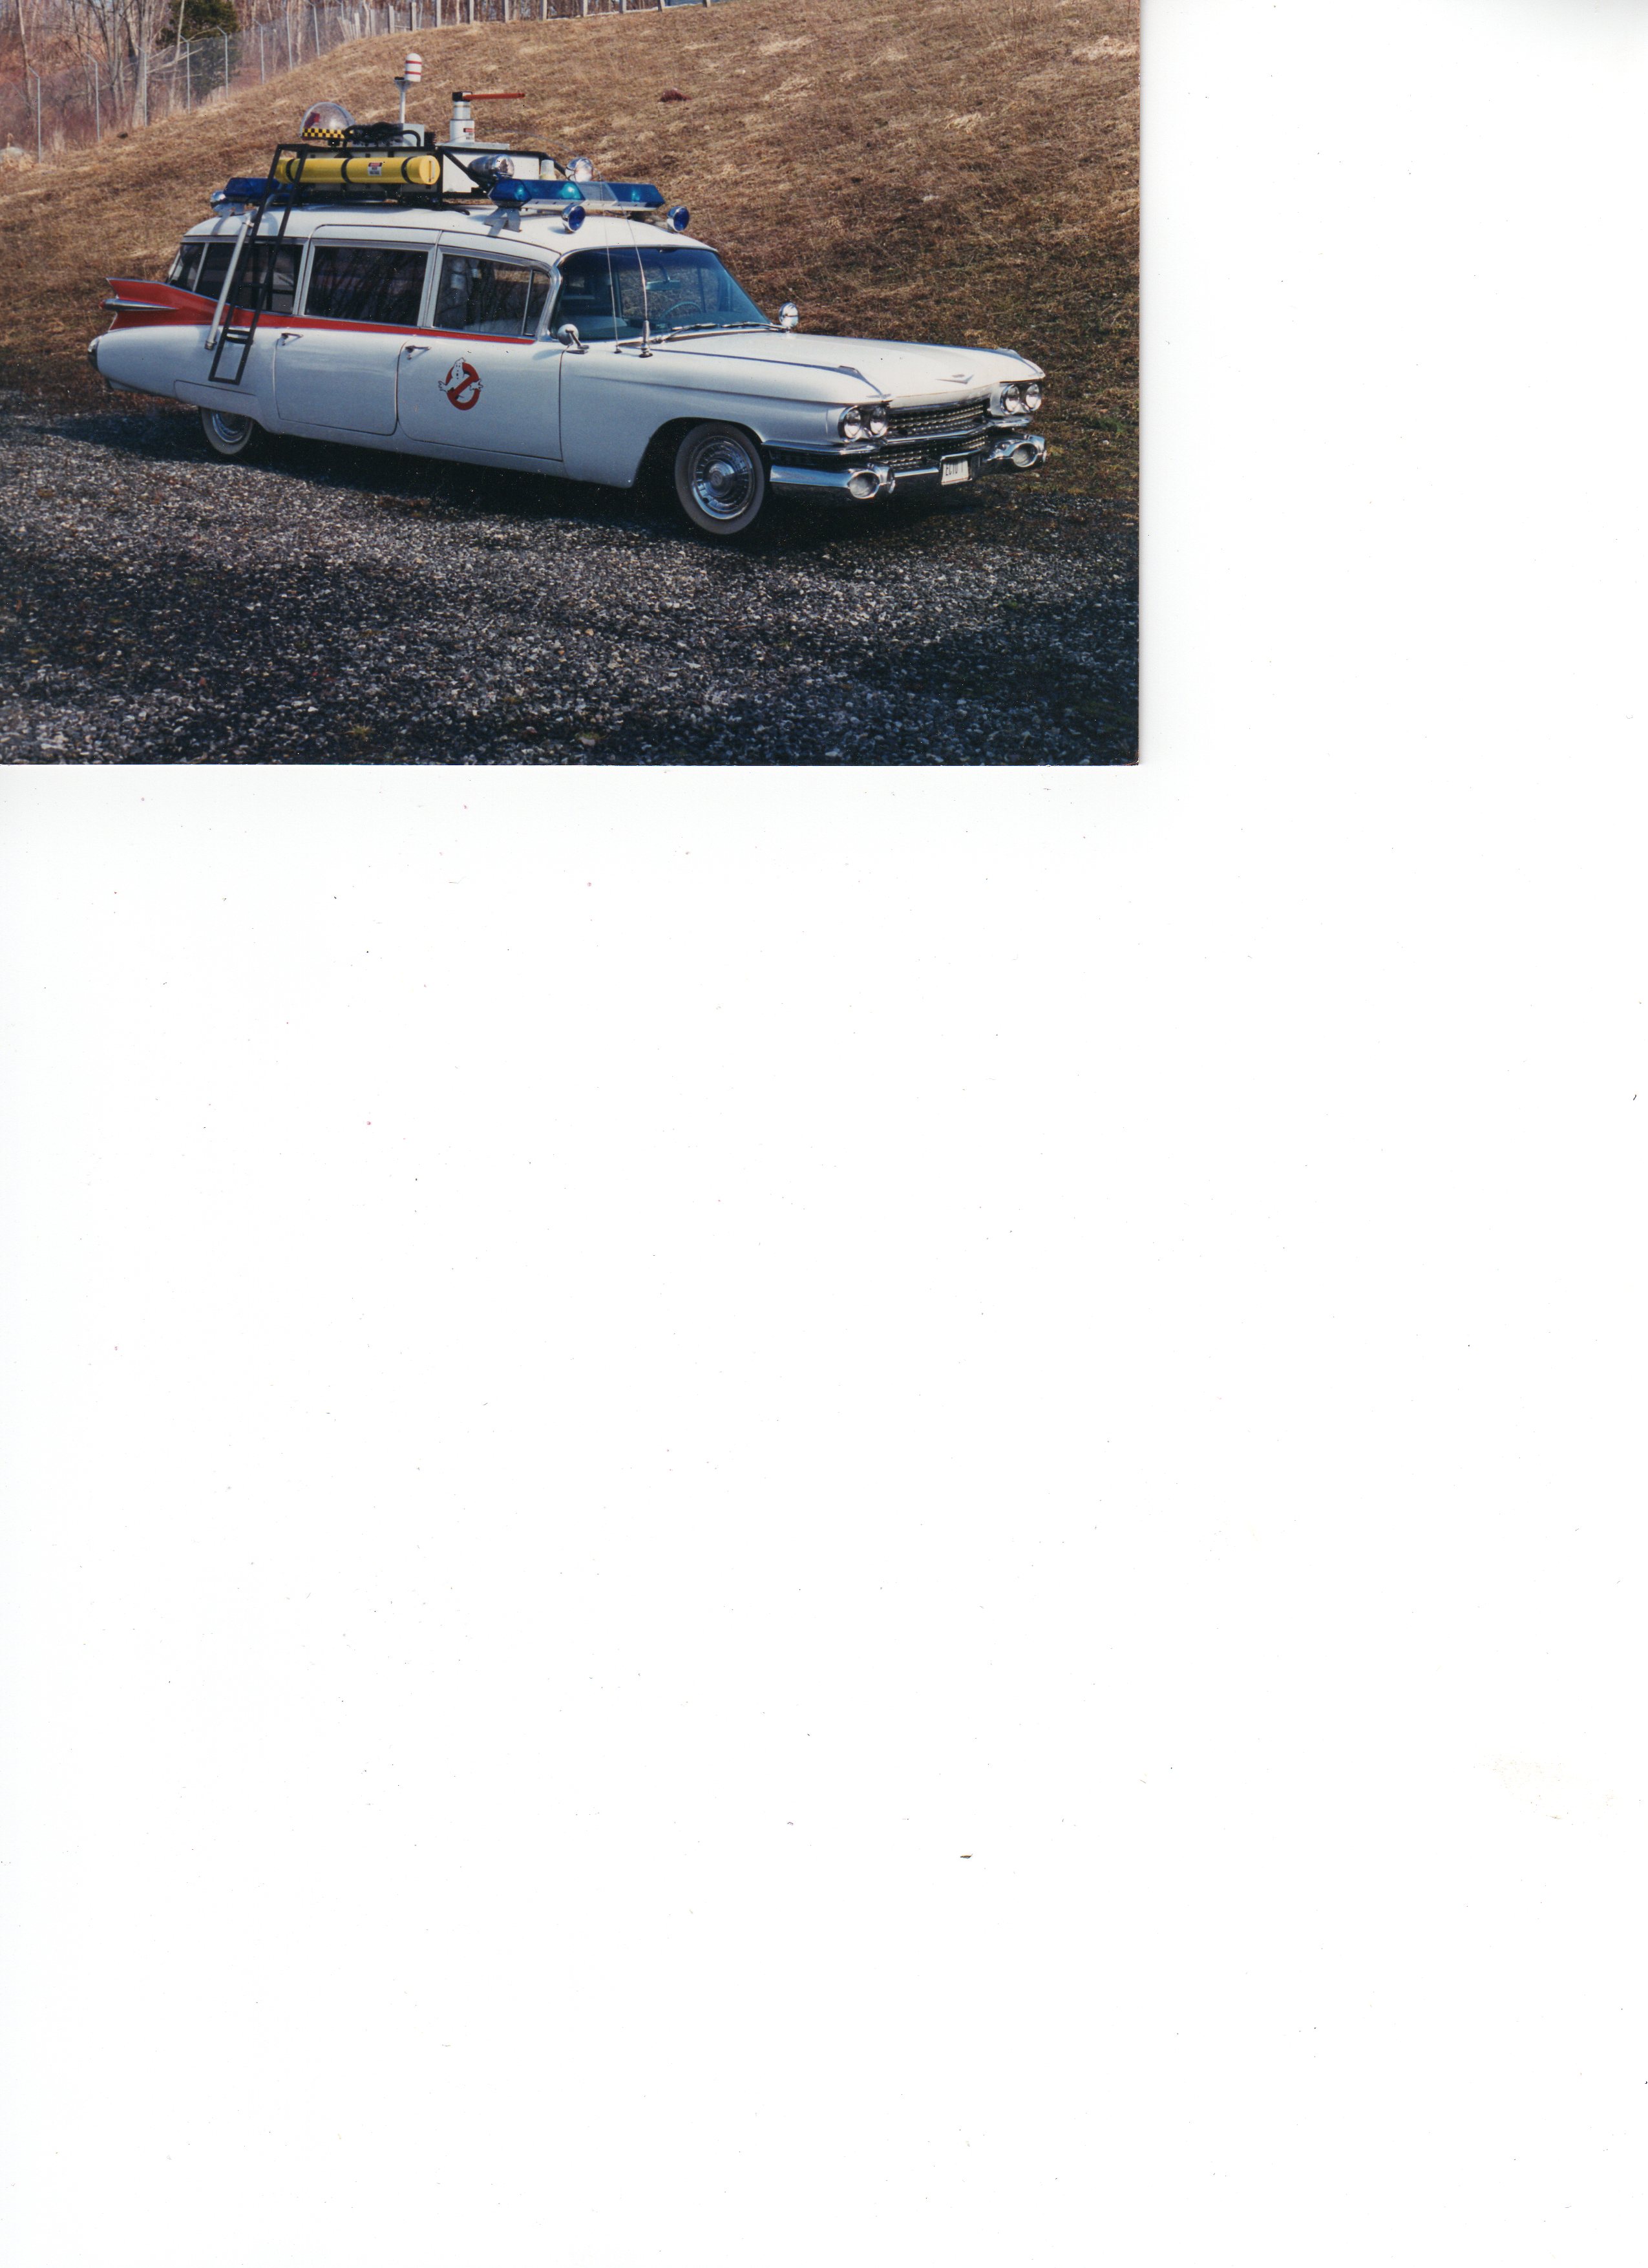 ECTO 1 built on 1959 Cadillac fabricated by Peter Mosen